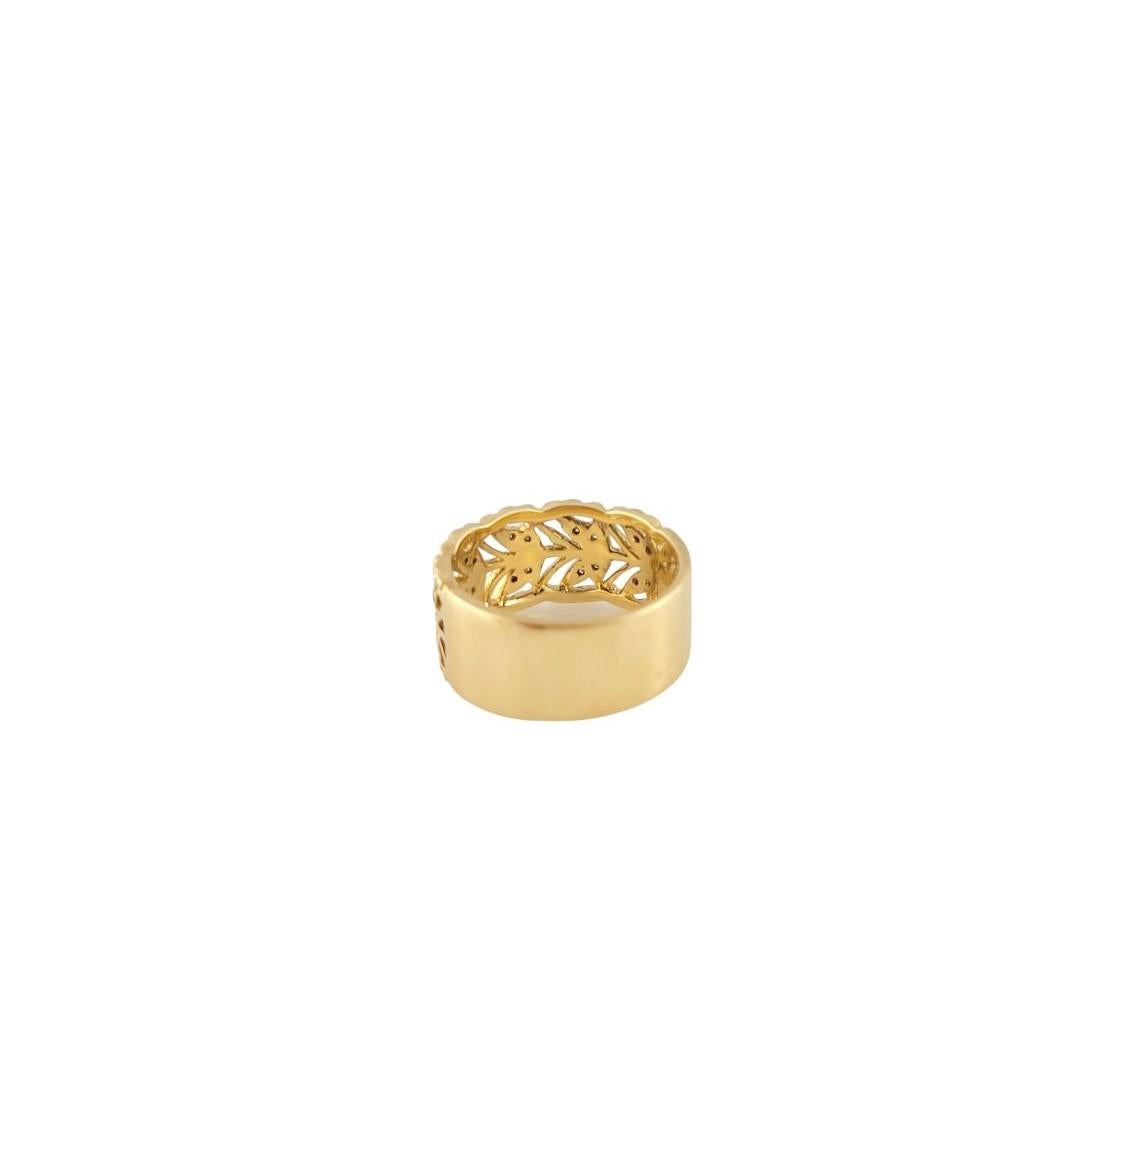 This elegant band features 20 round brilliant cut diamonds set in classic 18K yellow gold.  Width: 10 mm.

Shank: 9 mm.

Approximate total diamond weight:  .10 ct.

Diamond color:  G-H

Diamond clarity:  SI1-I1

Size:  6.5

Weight:  7.6 gr./  4.8